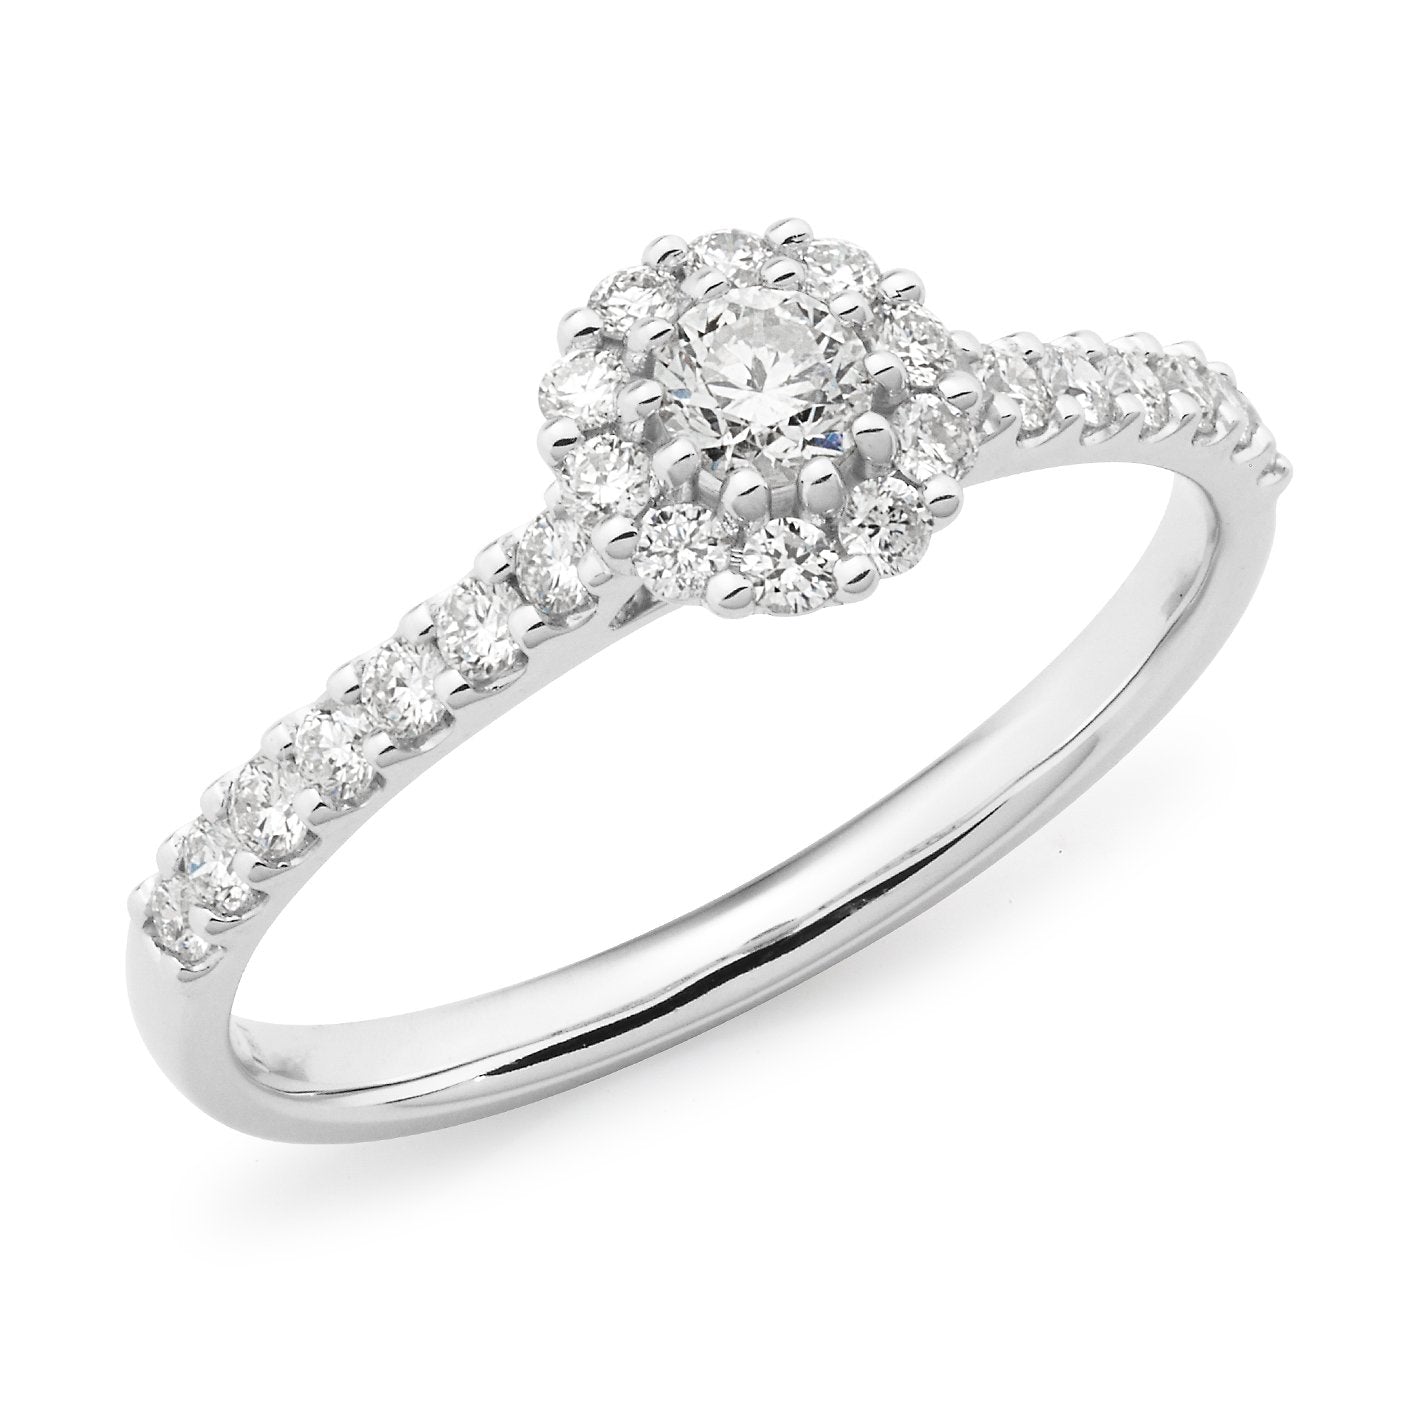 0.53ct Round Brilliant Cut Diamond Claw Set Halo Engagement Ring in 9ct White Gold